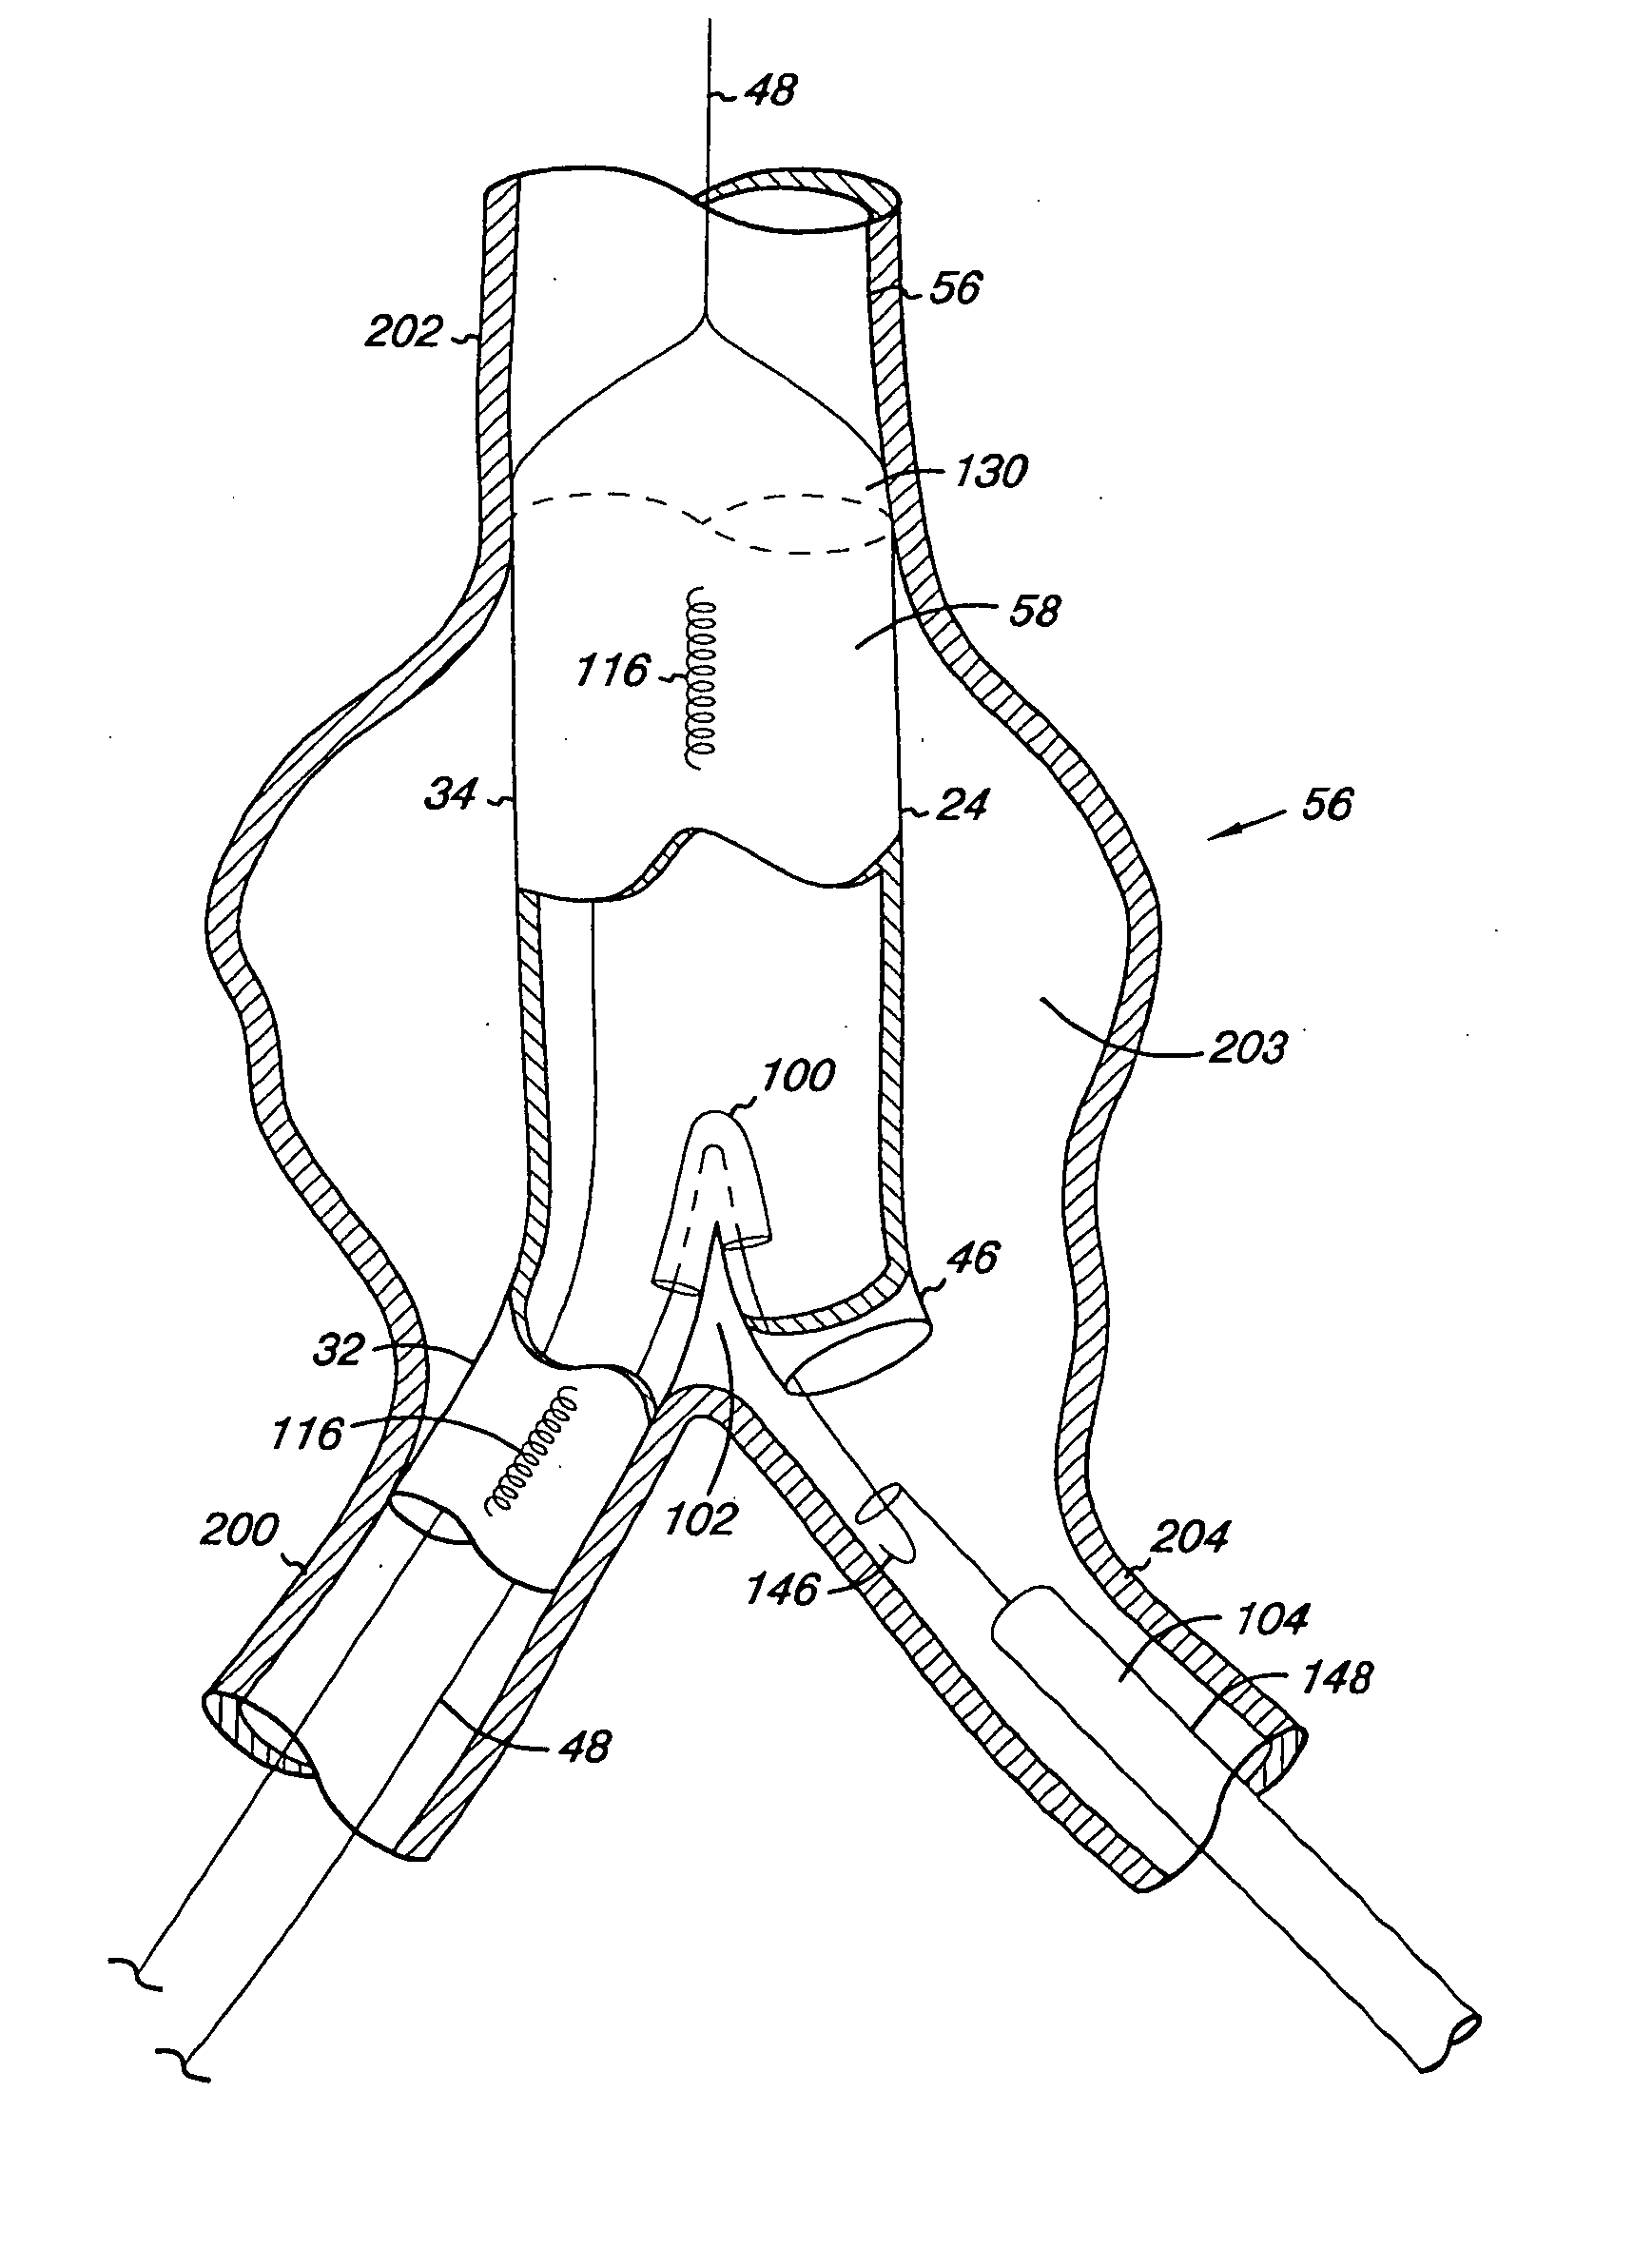 Endovascular graft including substructure for positioning and sealing within vasculature